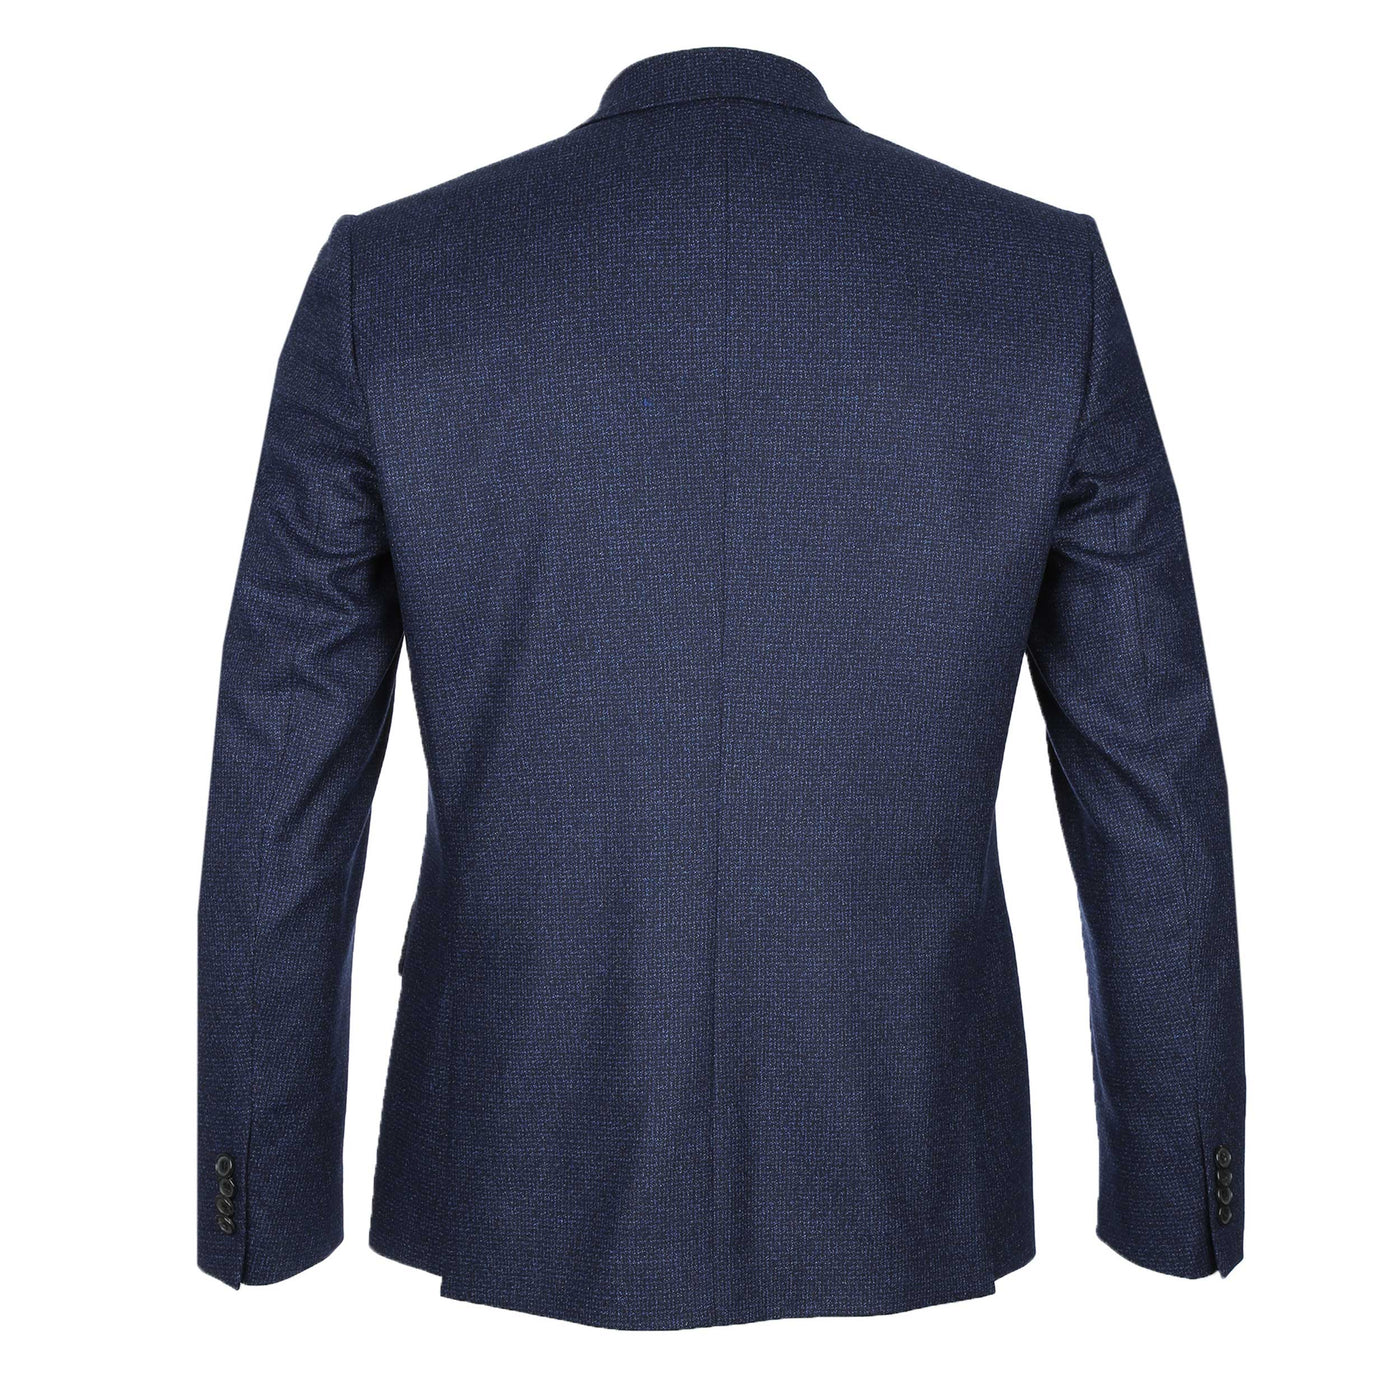 Paul Smith 2 Button Tailored Fit suit in Navy Back